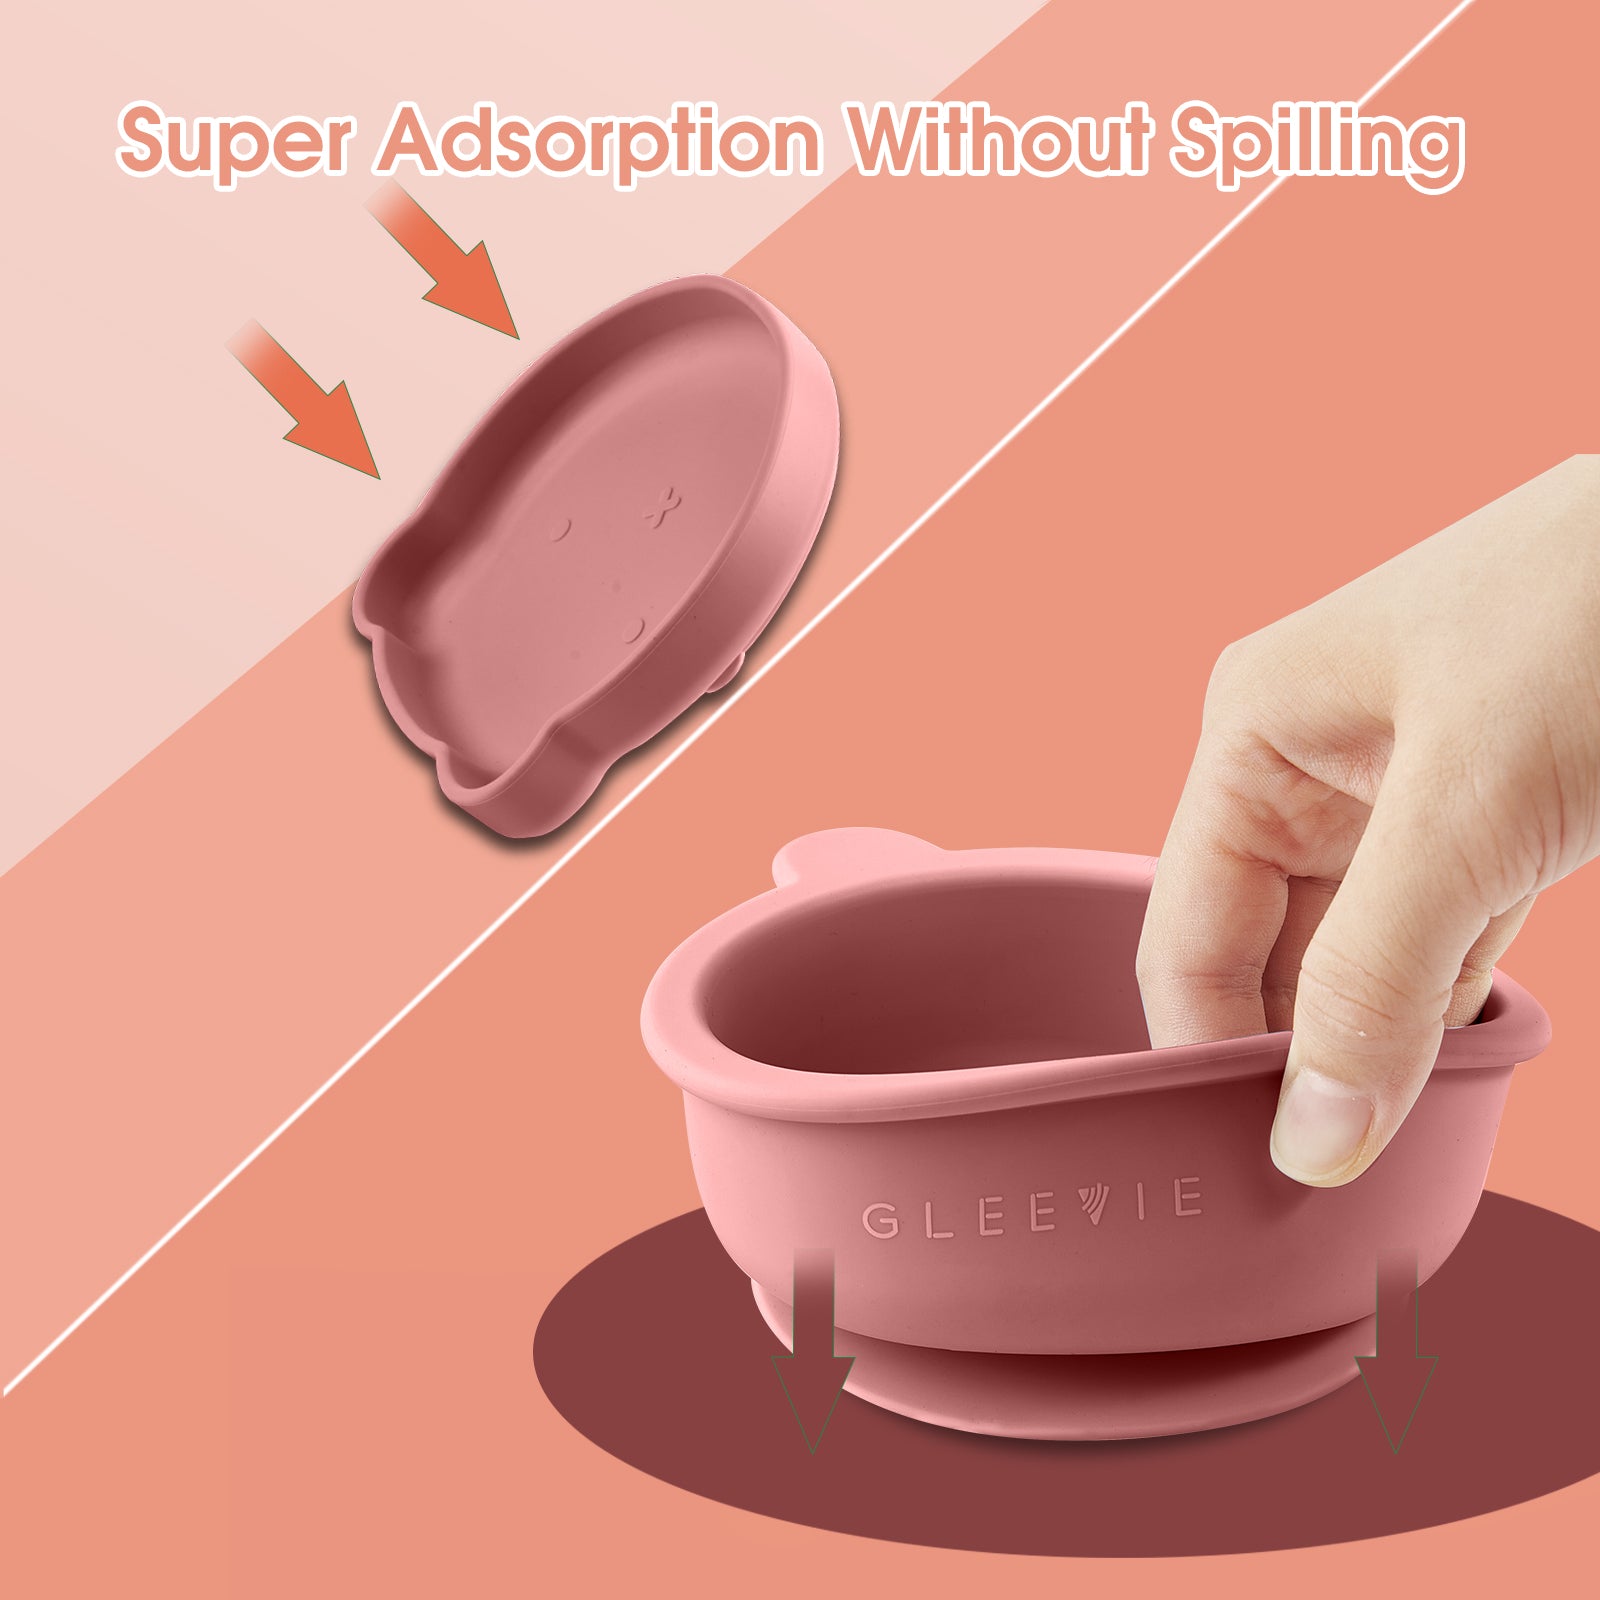 Gleevie Silicone Baby and Child Feeding Sets (7 Pieces)